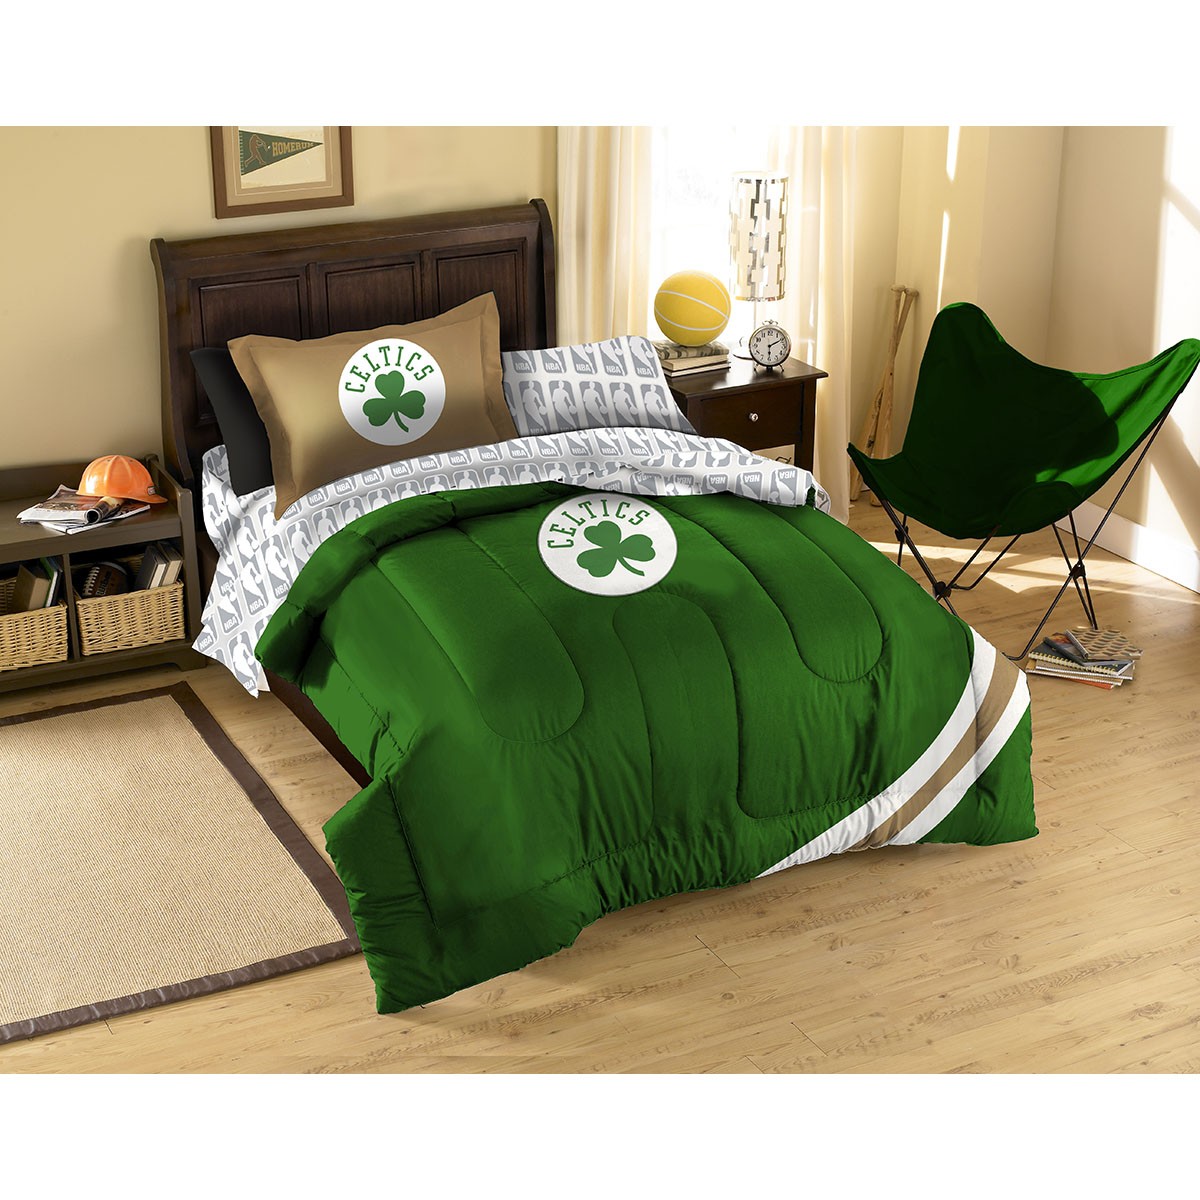 Boston Celtics Contrast Twin Forter Bed In A Bag